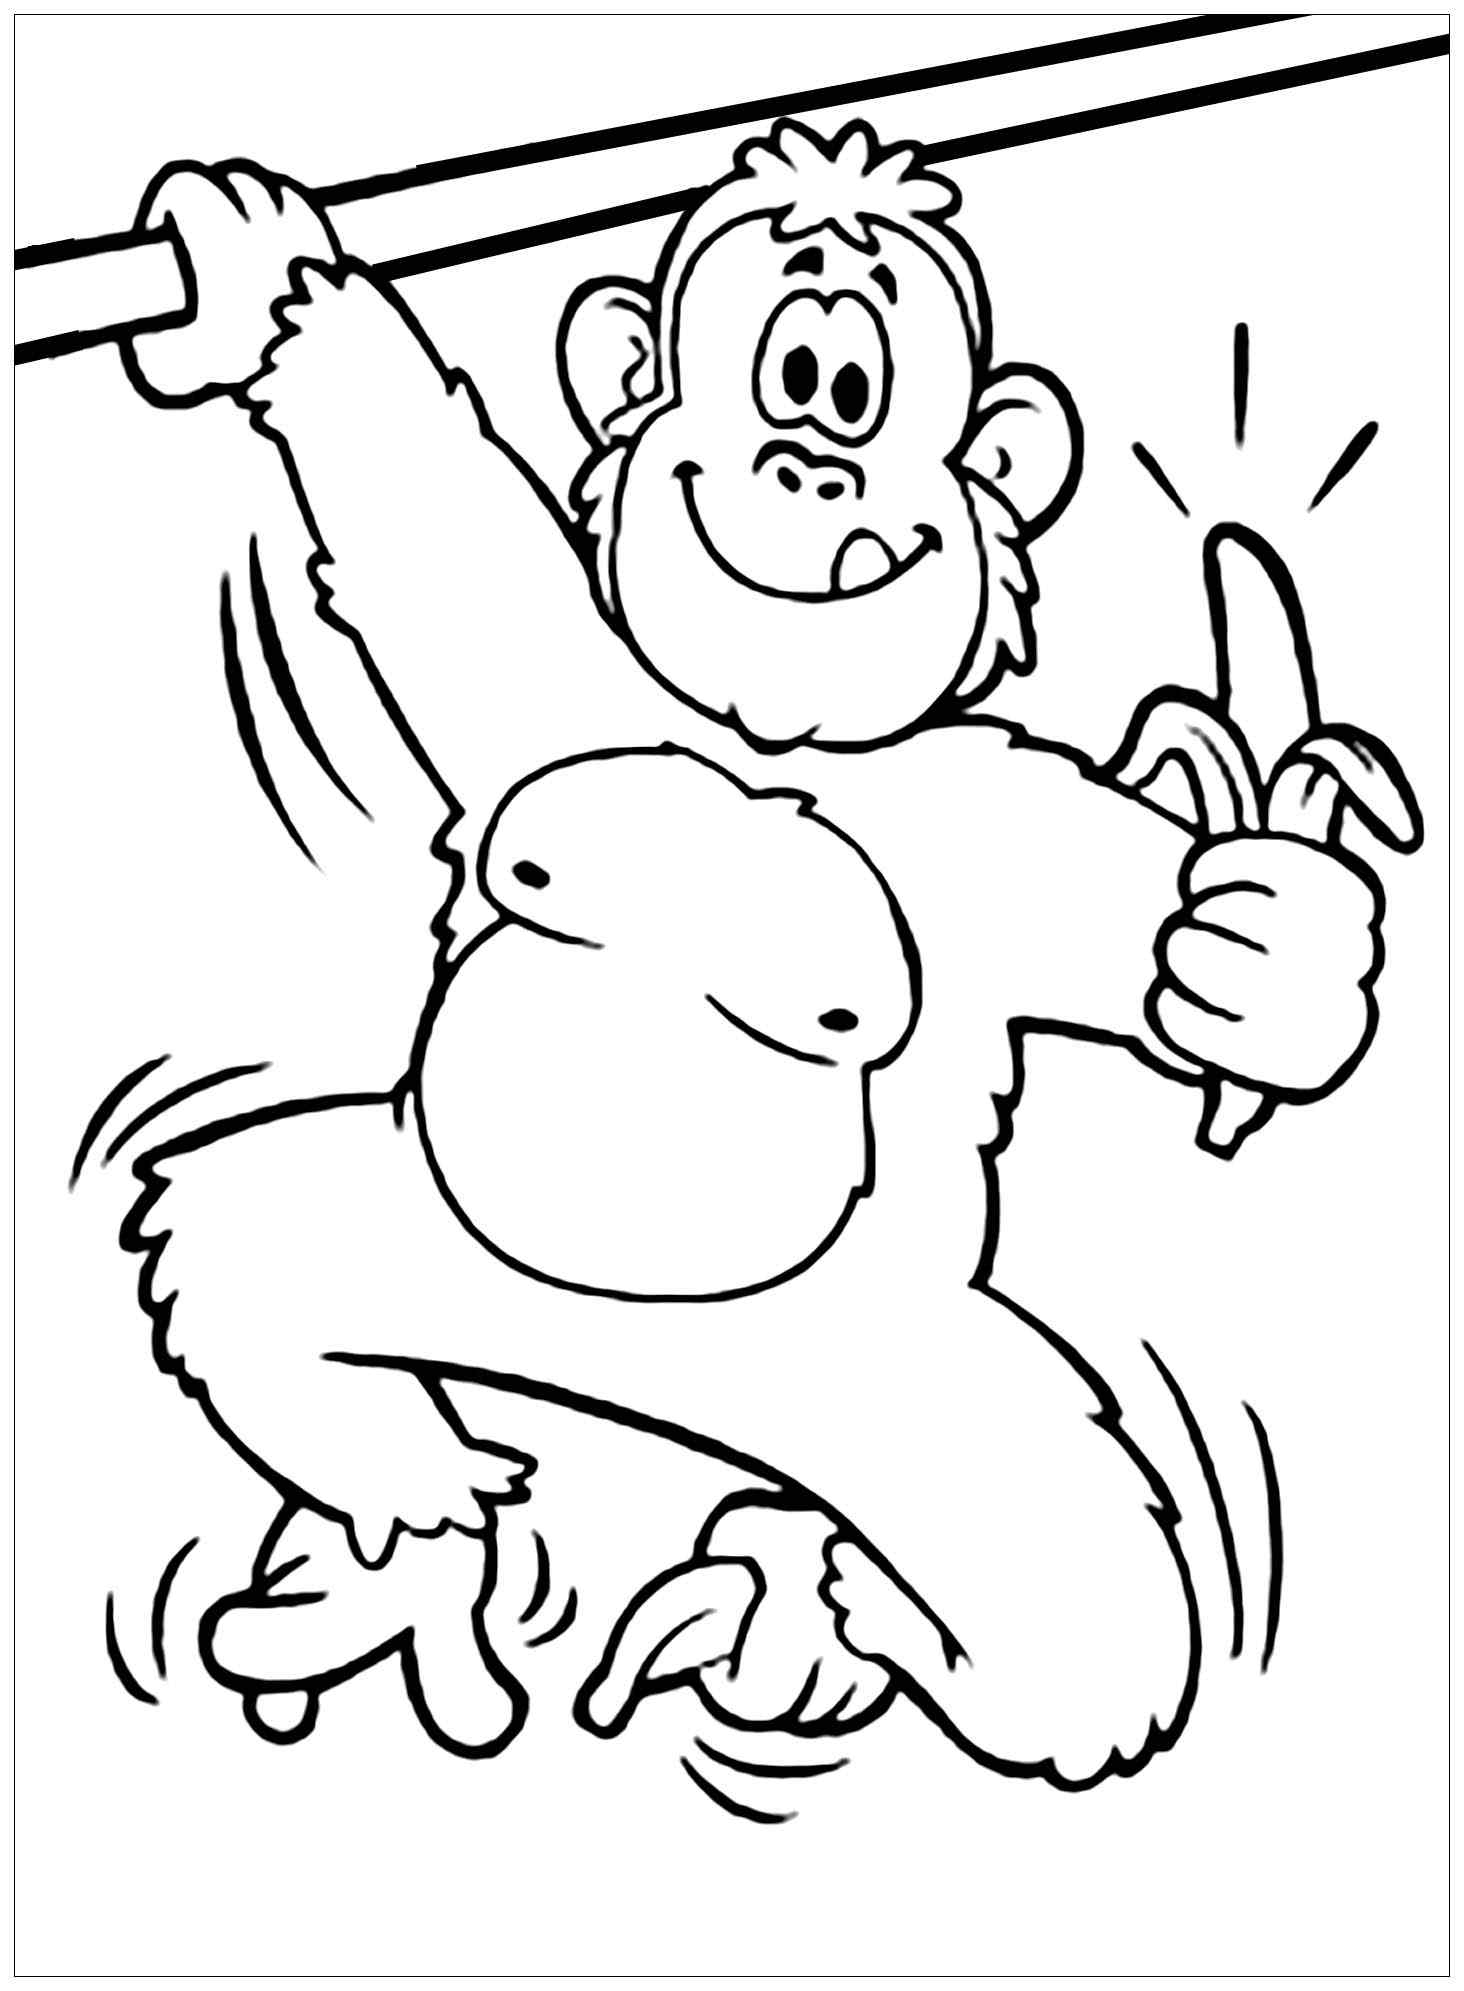 Monkeys For Children Coloring Page